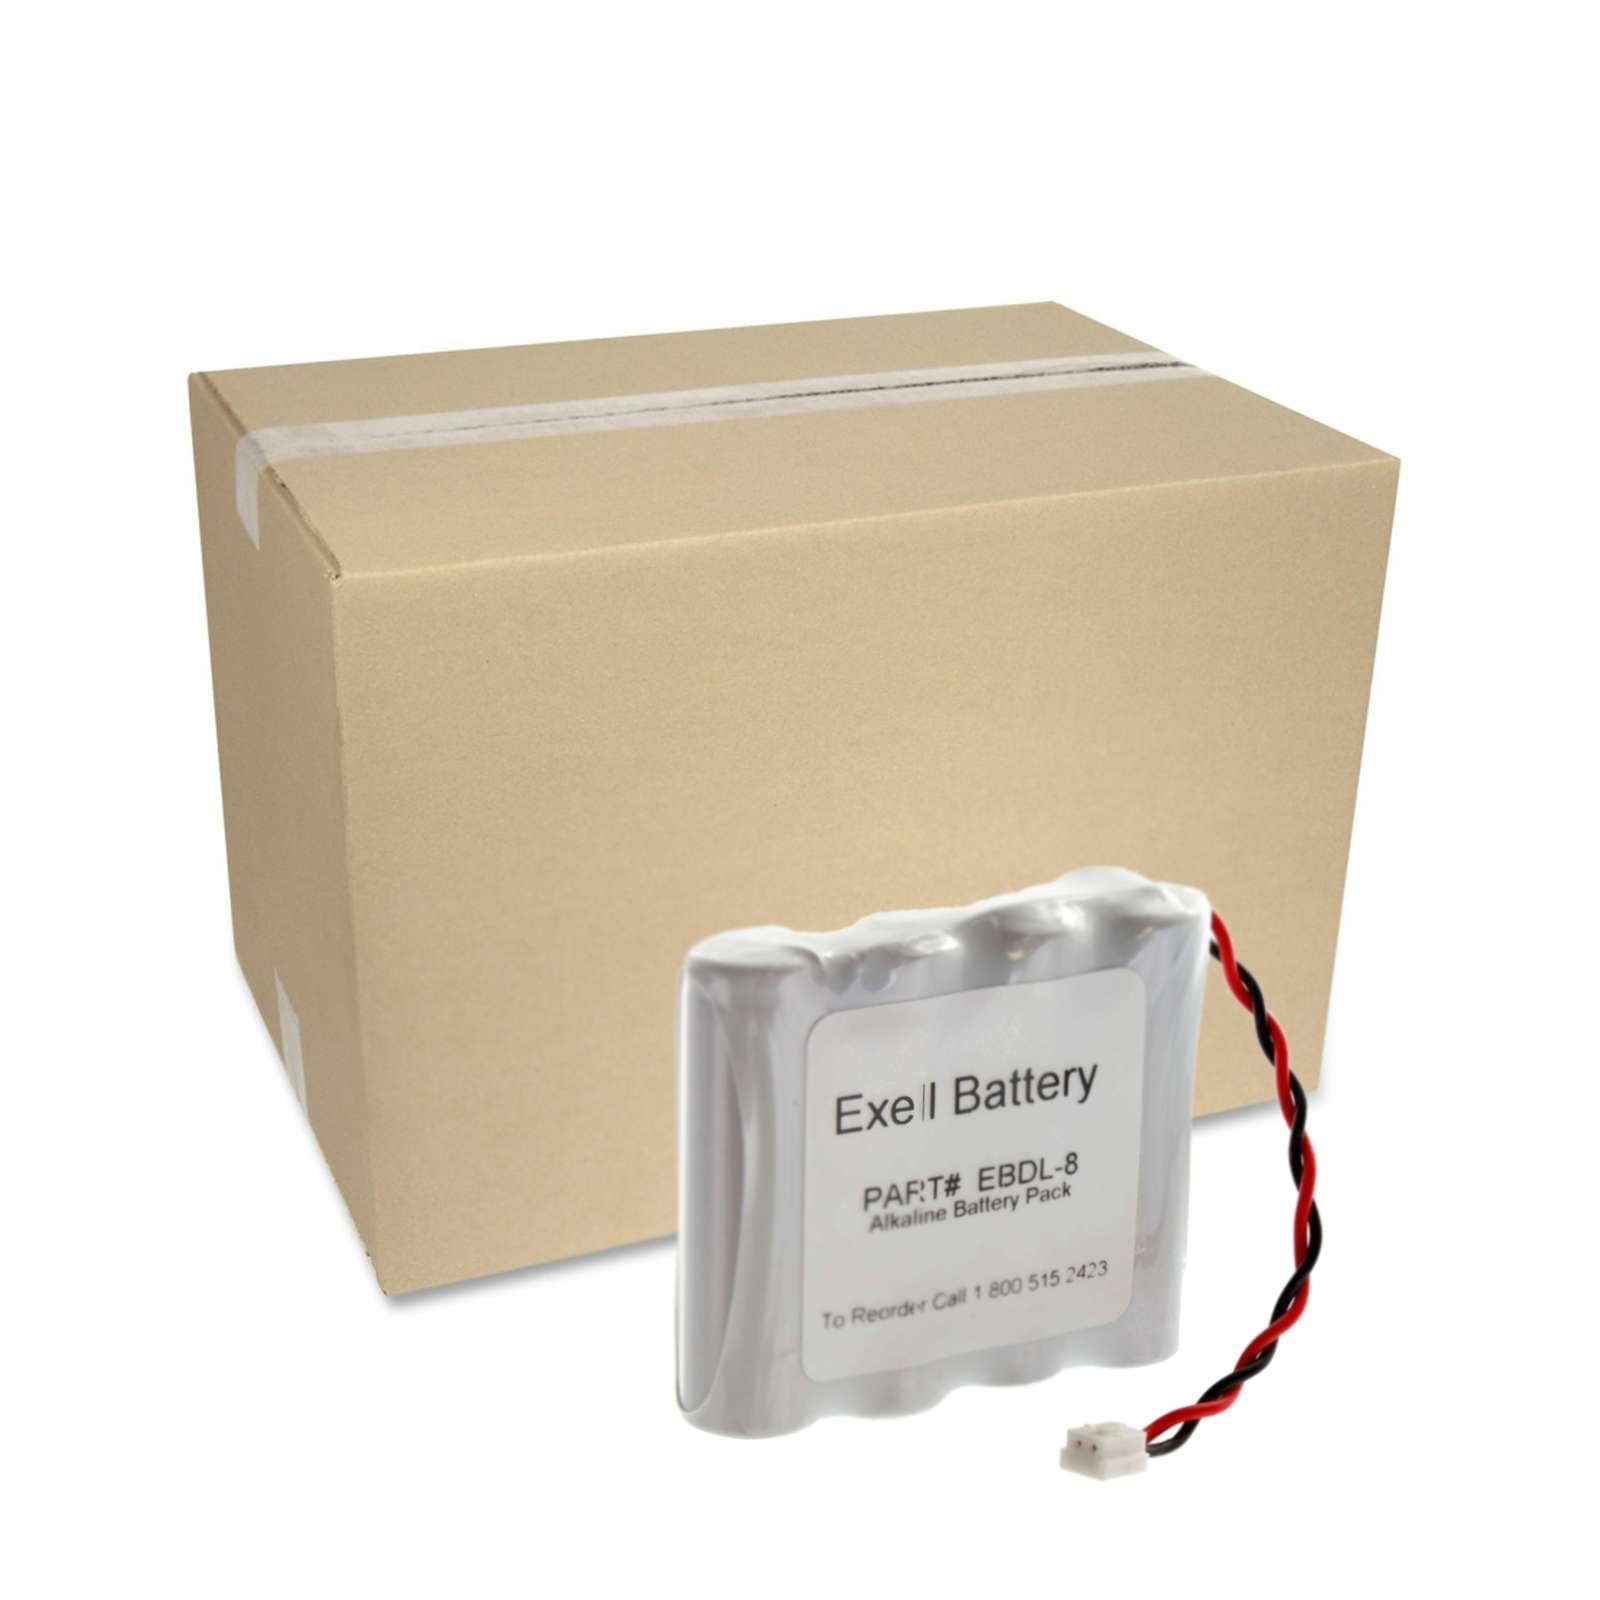 48x Hotel Door Lock 6V 4-Cell Battery Packs Fits A28110,A28100 FAST USA SHIP 